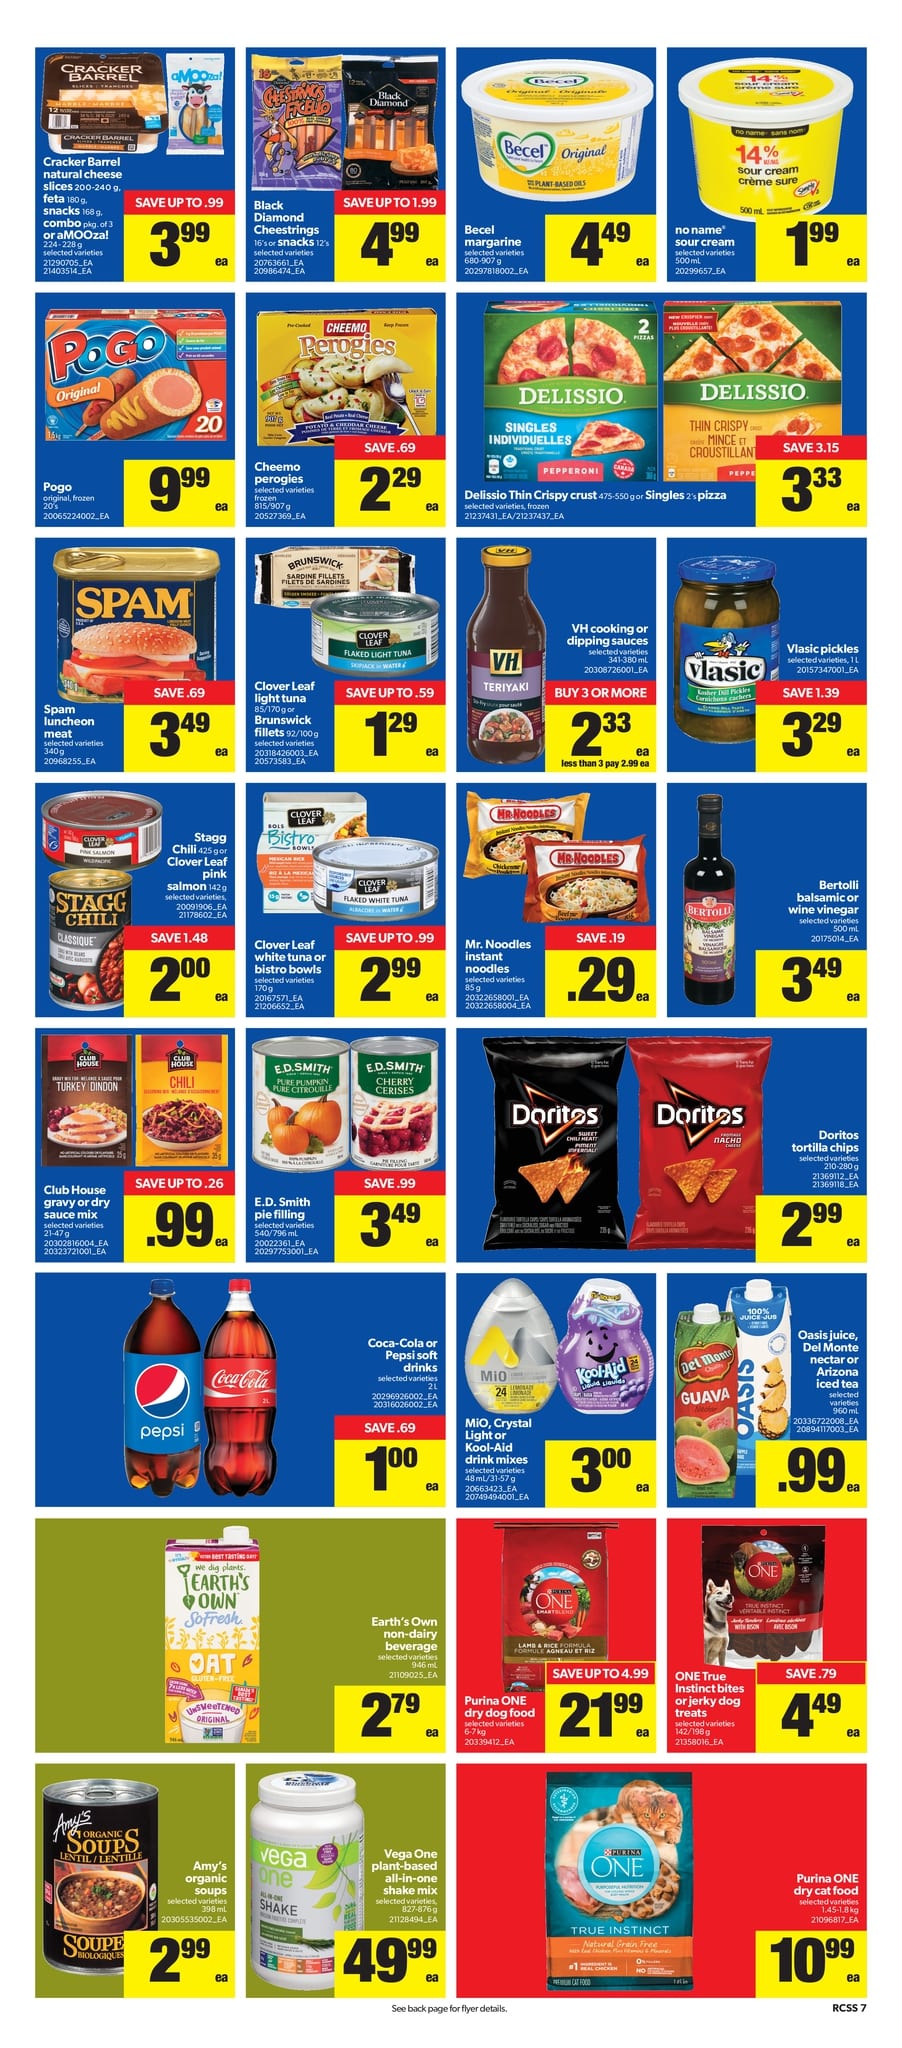 Real Canadian Superstore Ontario - Weekly Flyer Specials - Page 7